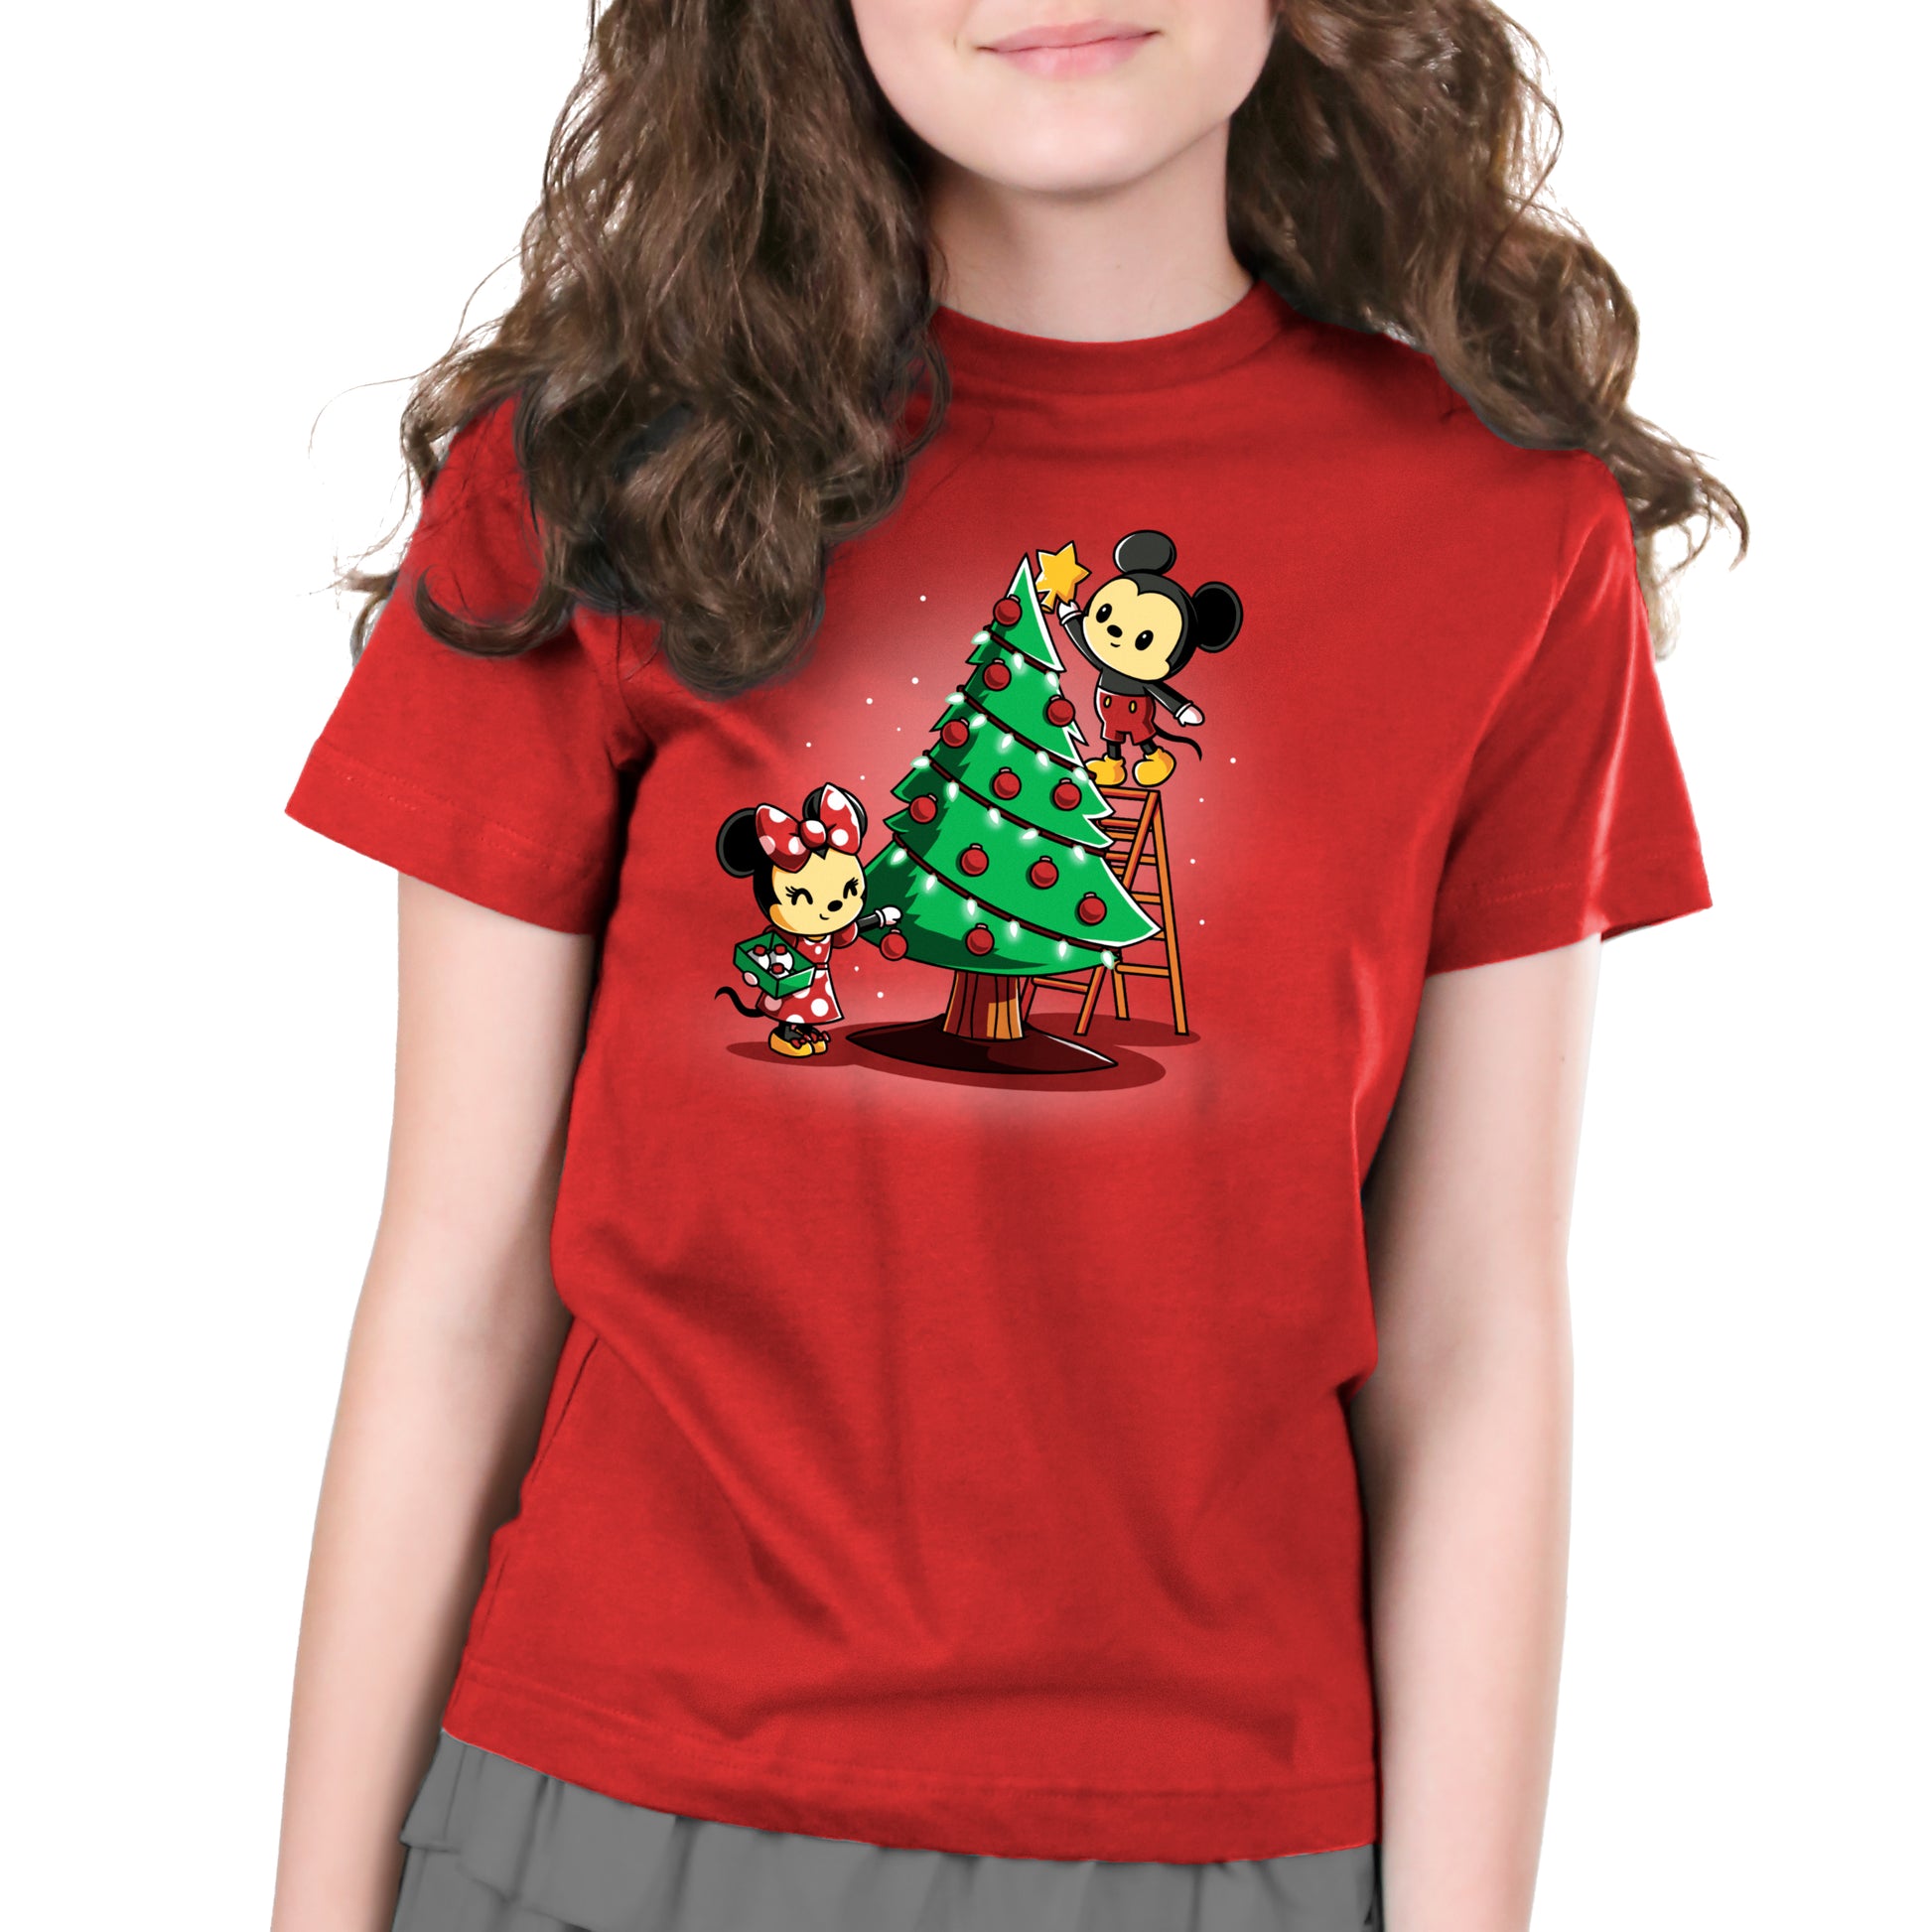 An officially licensed Disney Mickey and Minnie's Christmas Tree T-shirt featuring a girl wearing a red shirt with a Christmas tree.